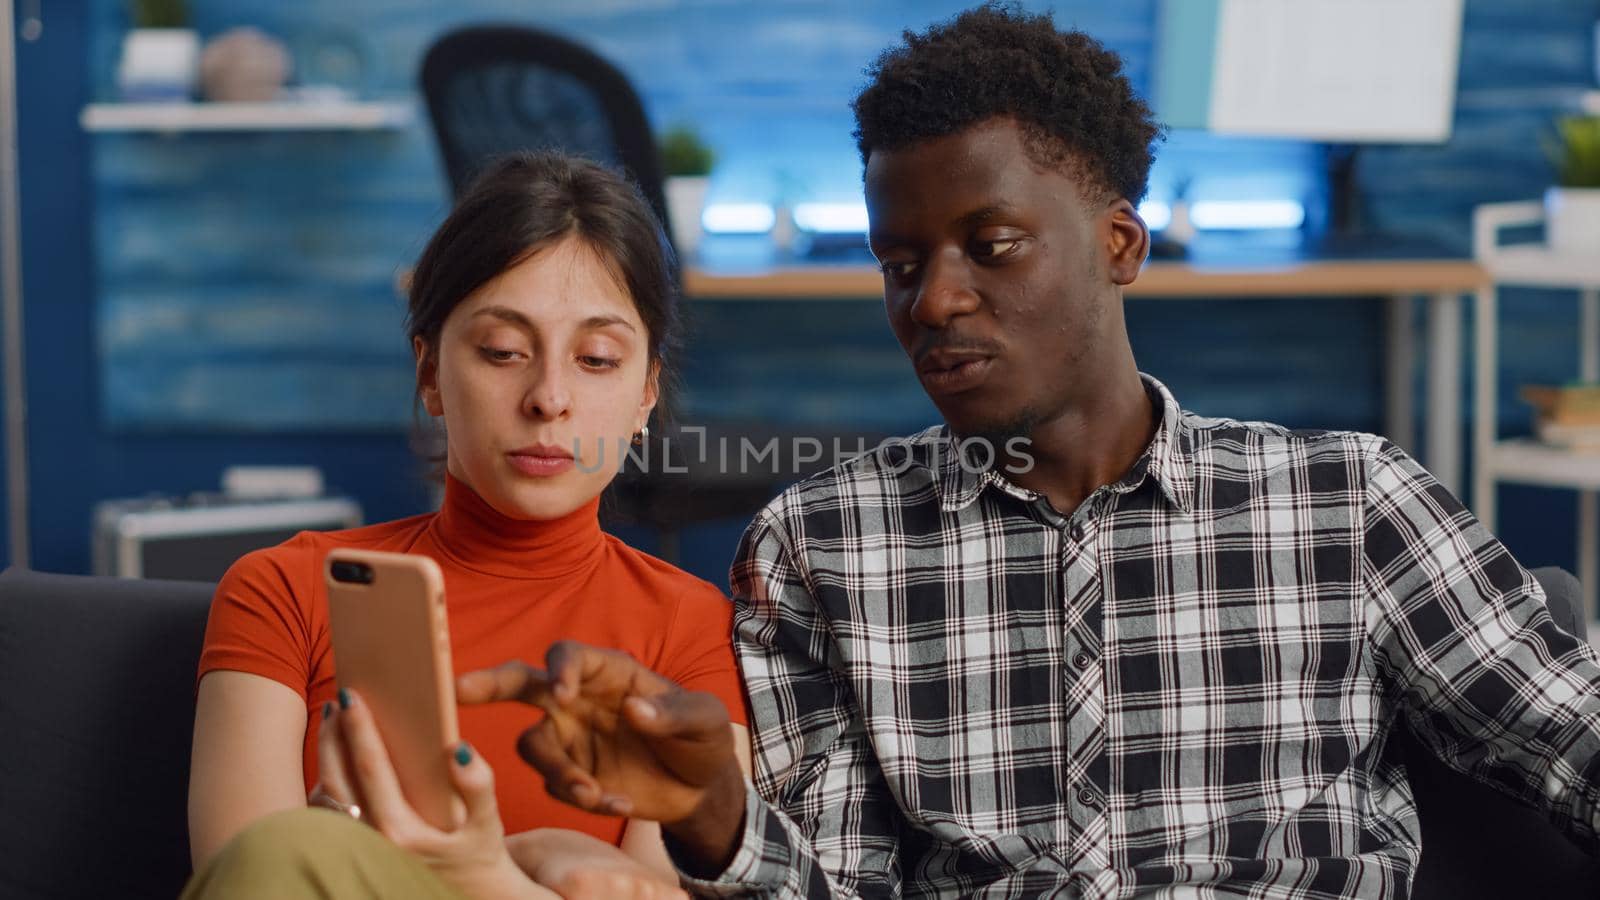 Modern interracial couple using smartphone in living room. Young multi ethnic people looking at digital device and relaxing on couch at home. Cheerful husband and wife sitting together